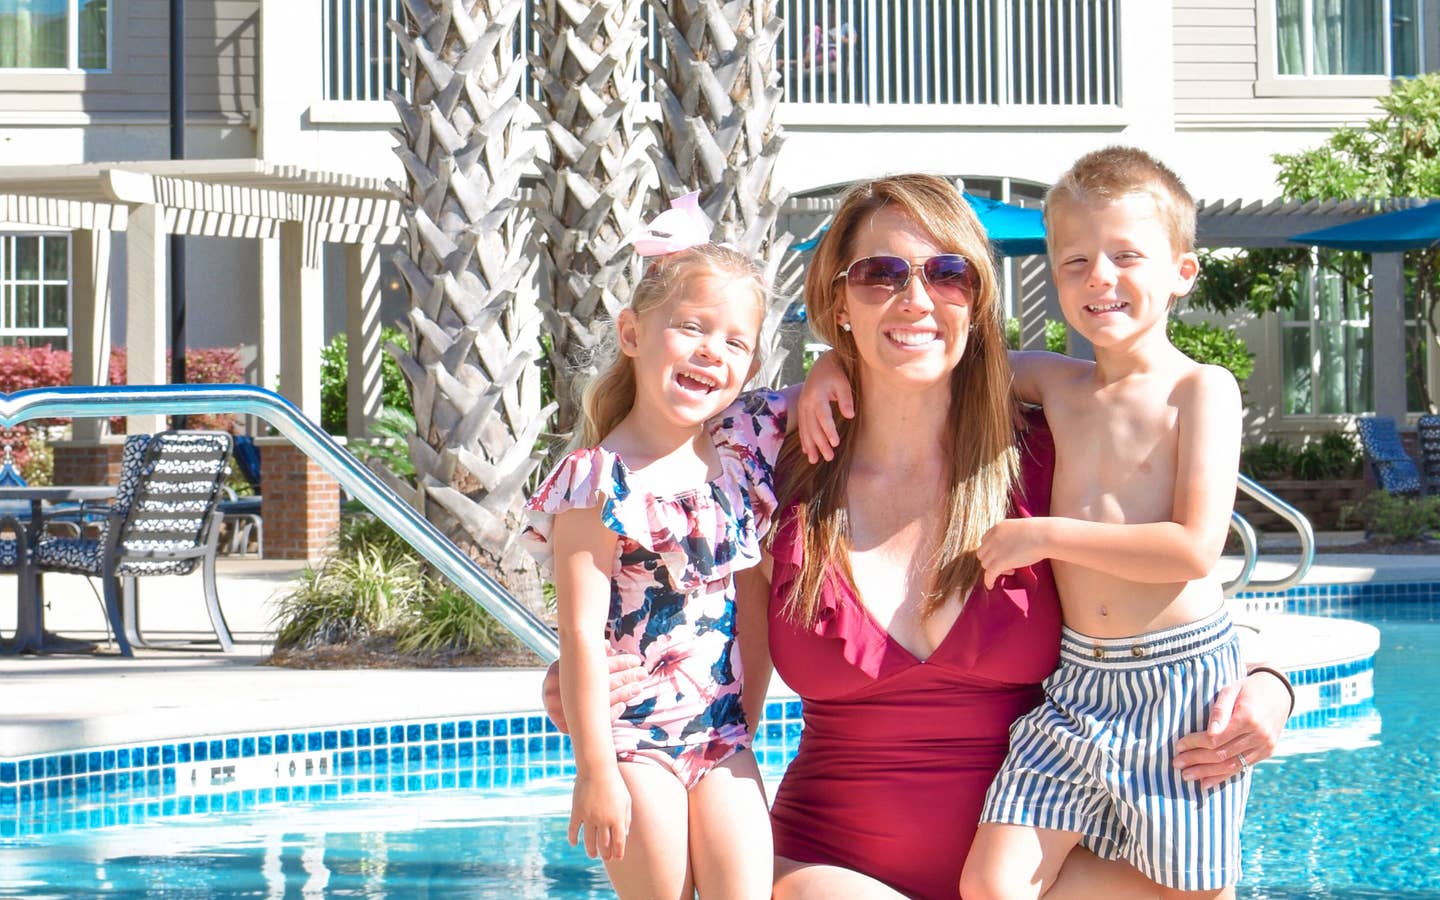 Featured contributor, Brianna Steele (middle), and her two children pose near our pool at South Beach Resort in Myrtle Beach, SC.